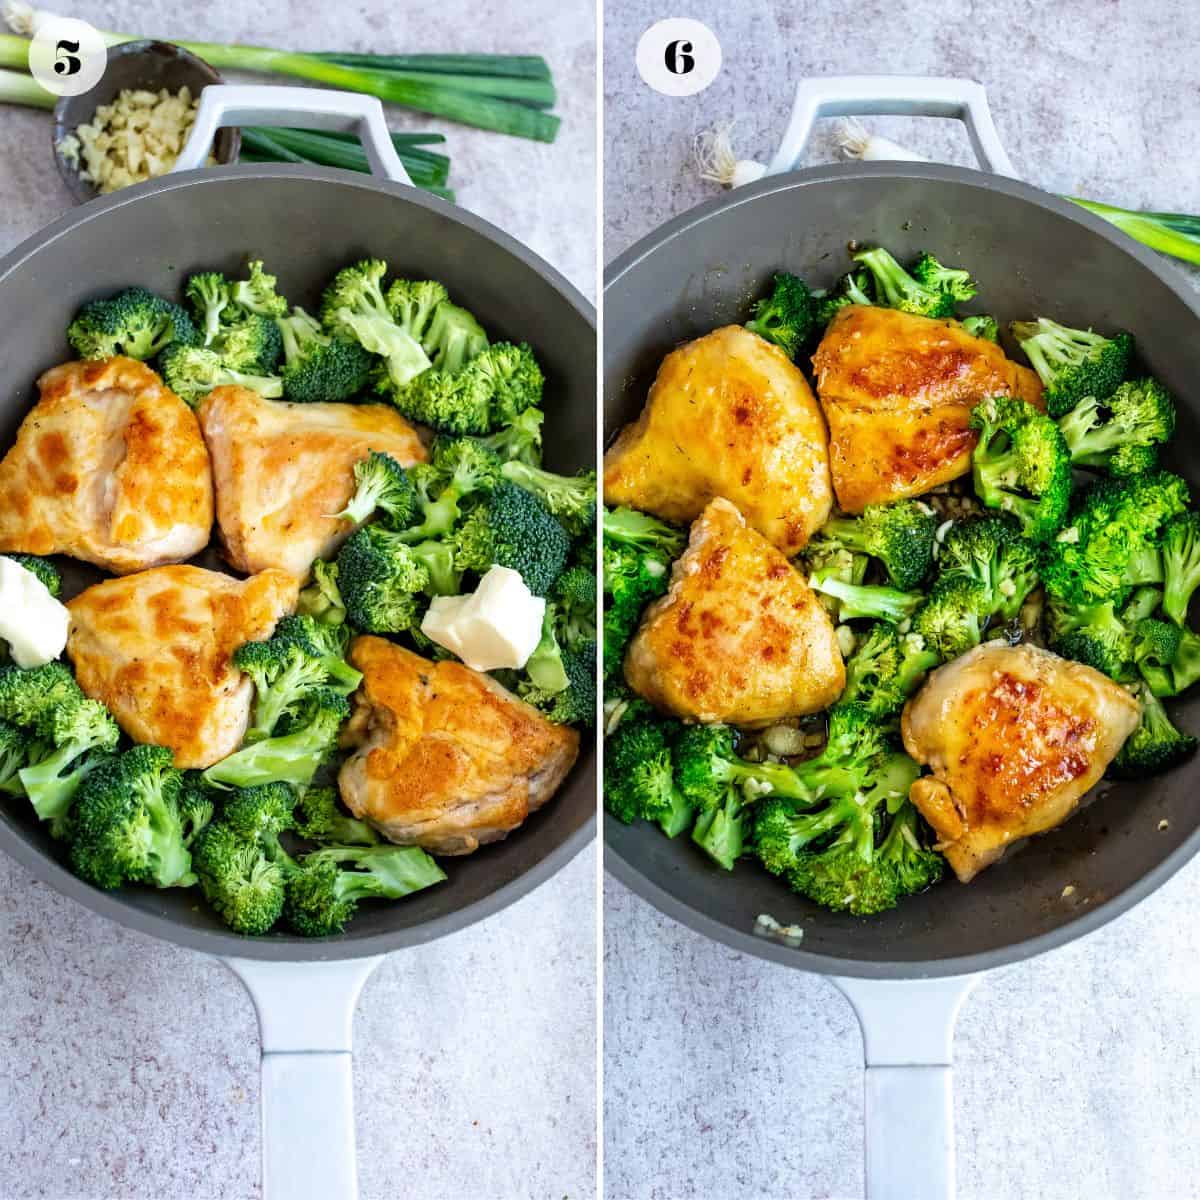 Grey skillet with chicken and broccoli in it. 